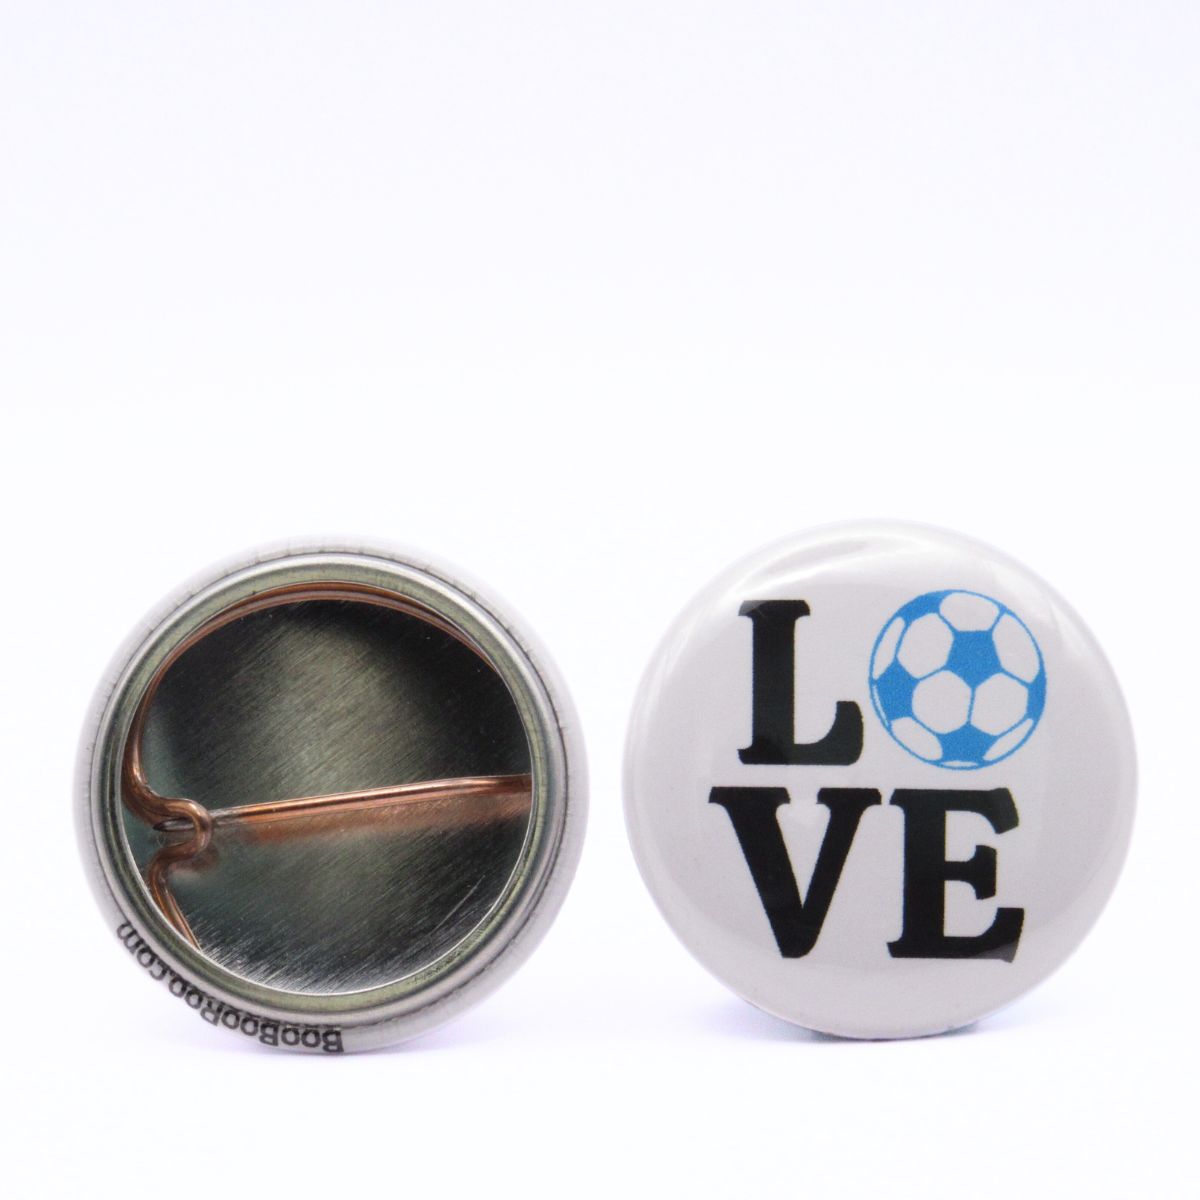 BooBooRoo Pinback Button (i.e. button, badge, pin) displaying the word "Love" with the "O" replaced by a soccer ball. Image showing front and back of high-quality metal button.